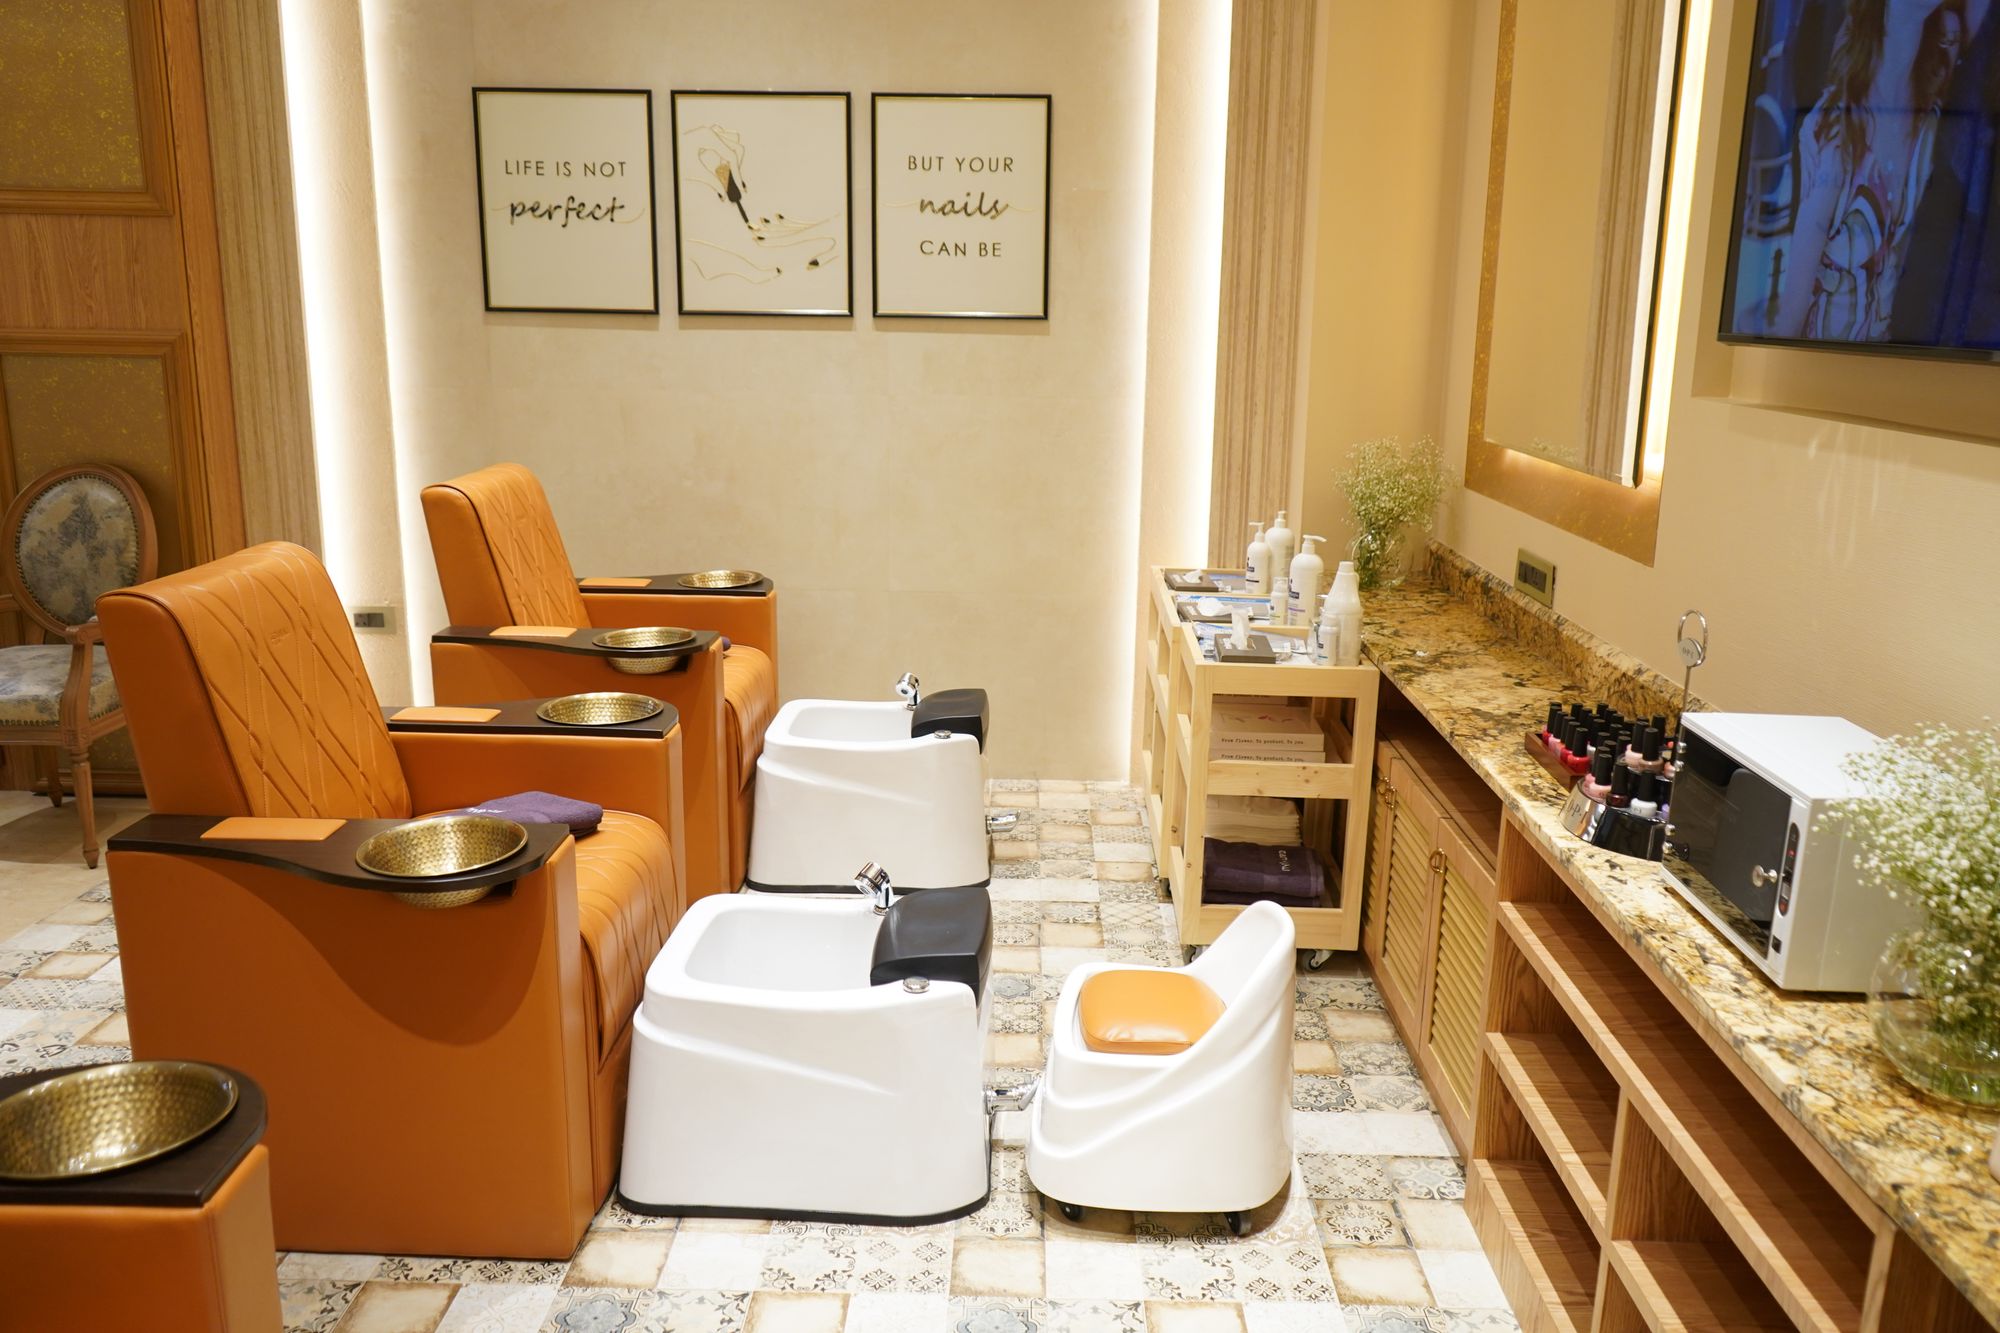 5 Salons & Spas In Mumbai You Need To Visit For A Luxurious Pick-Me-Up